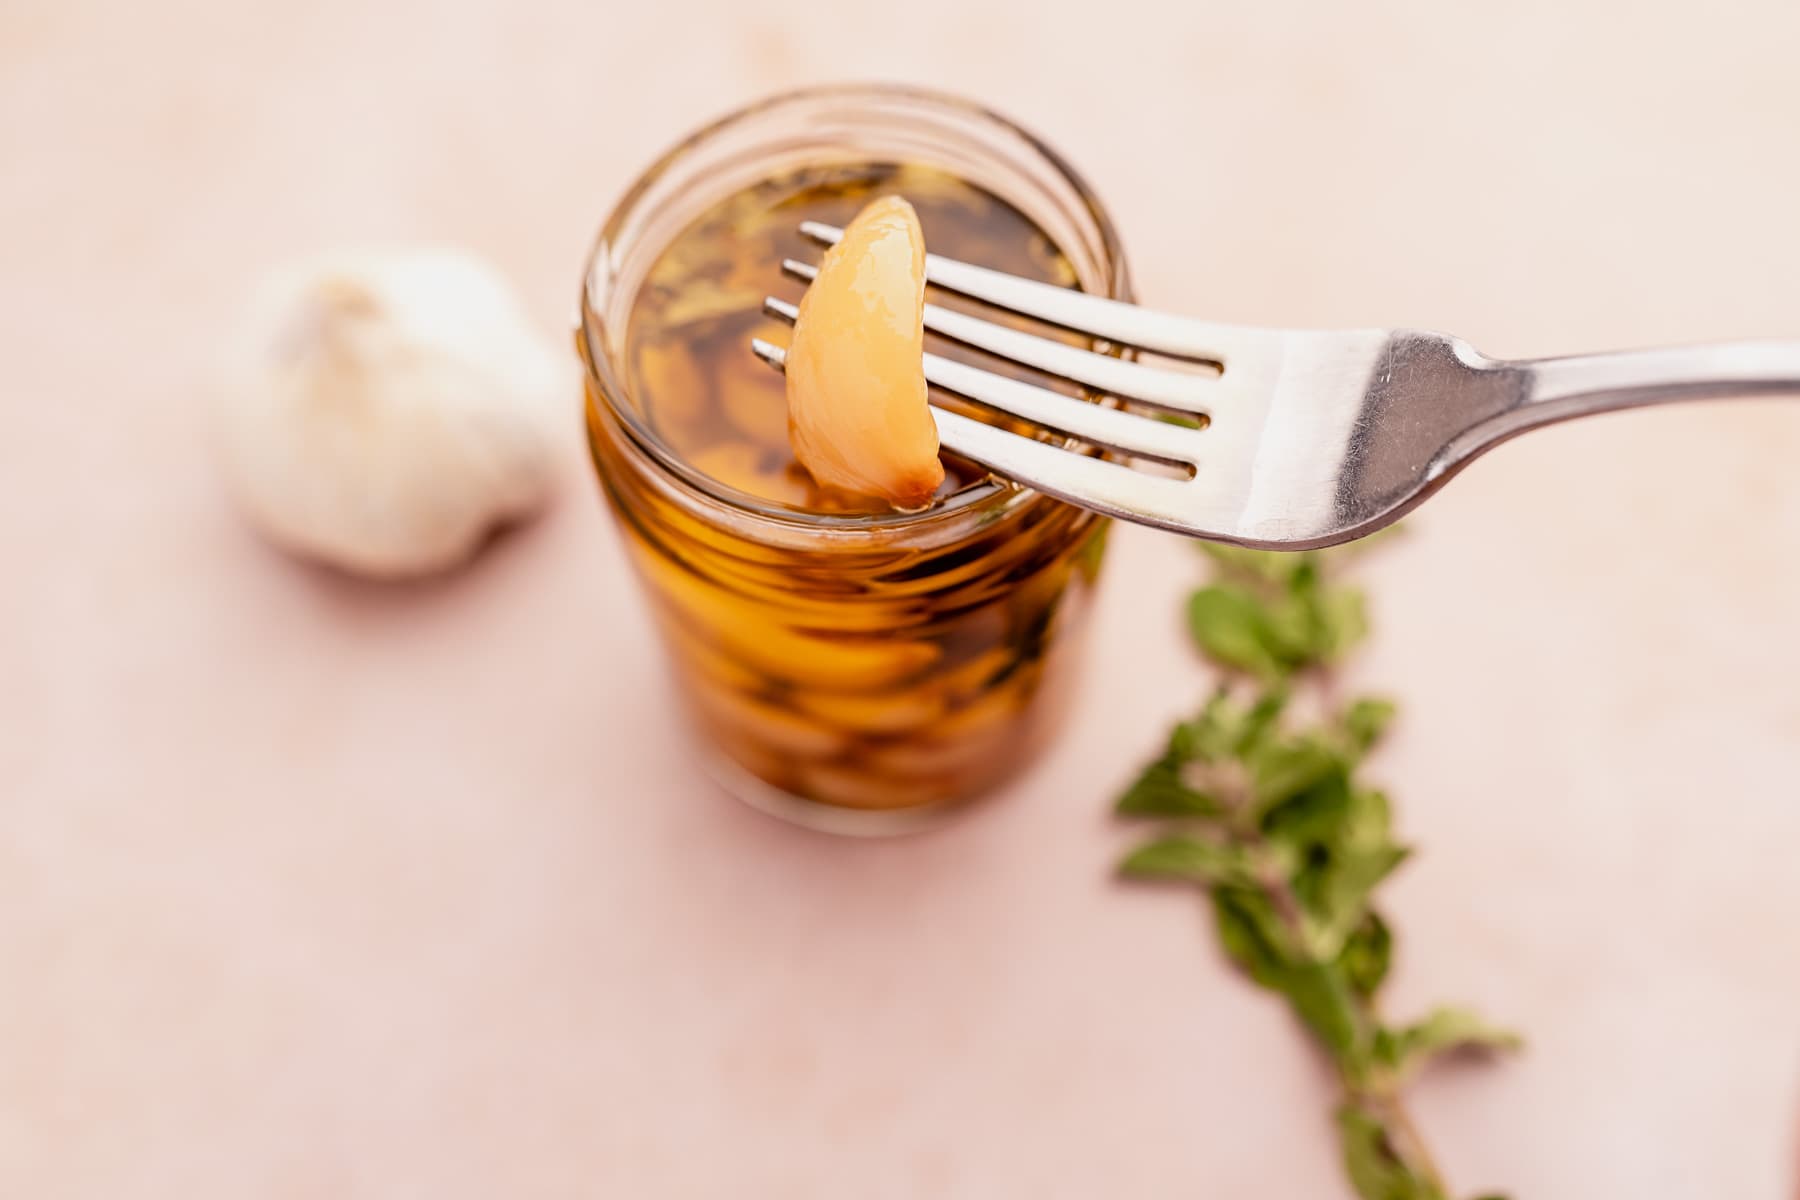 A fork is delicately holding a jar of garlic confit.